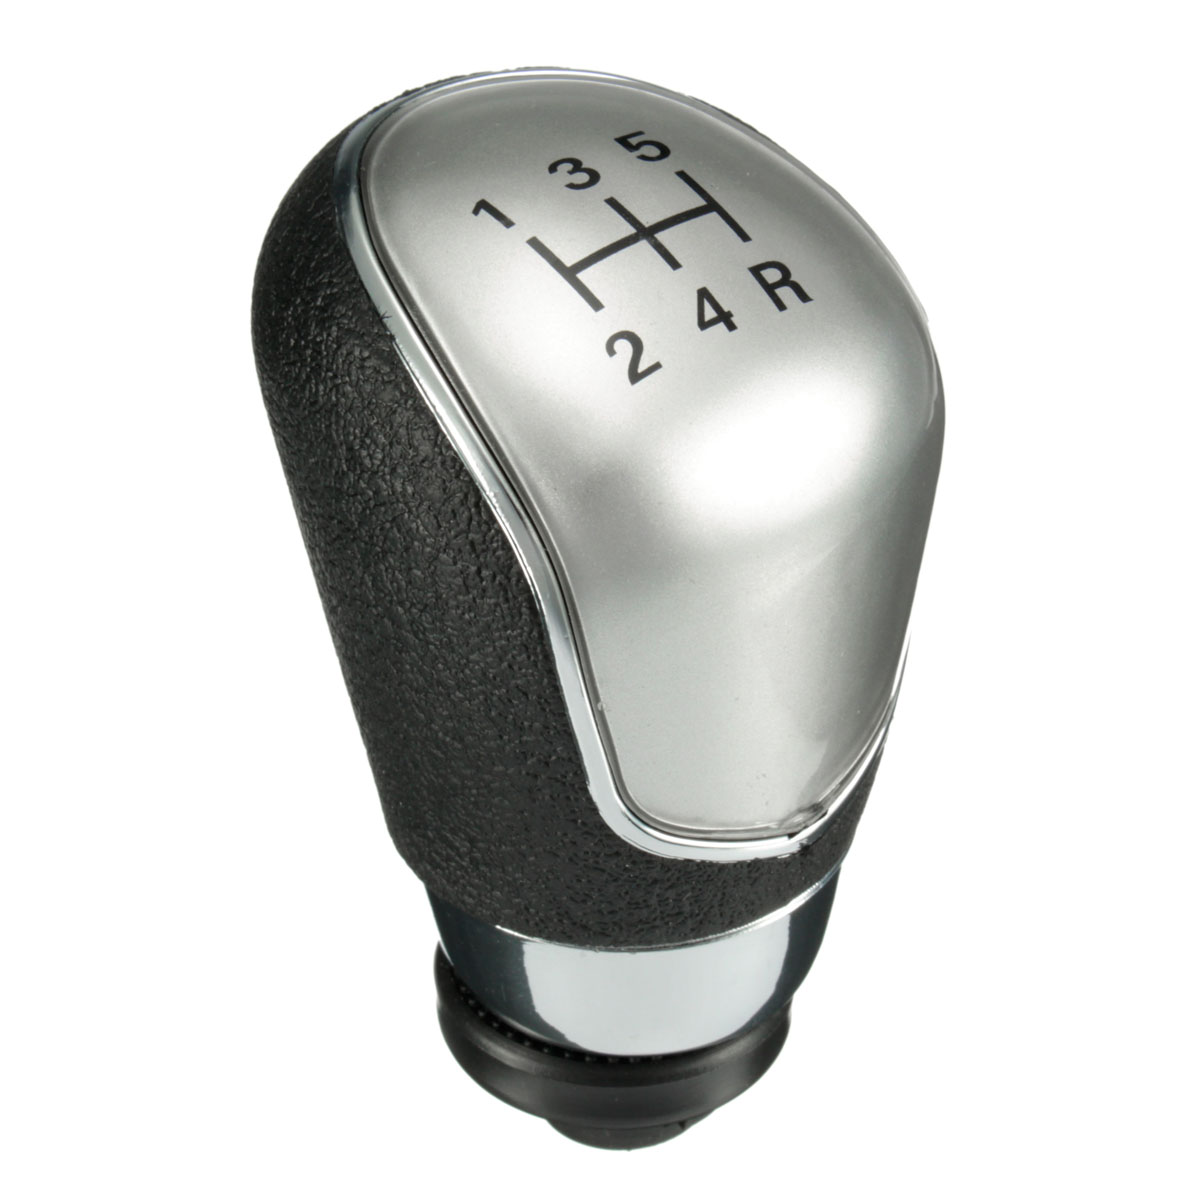 5 Speed Gear Shift Knob with Gaitor Gaiter Boot Cover for Ford Focus MK2 2005-2008 2010-2012